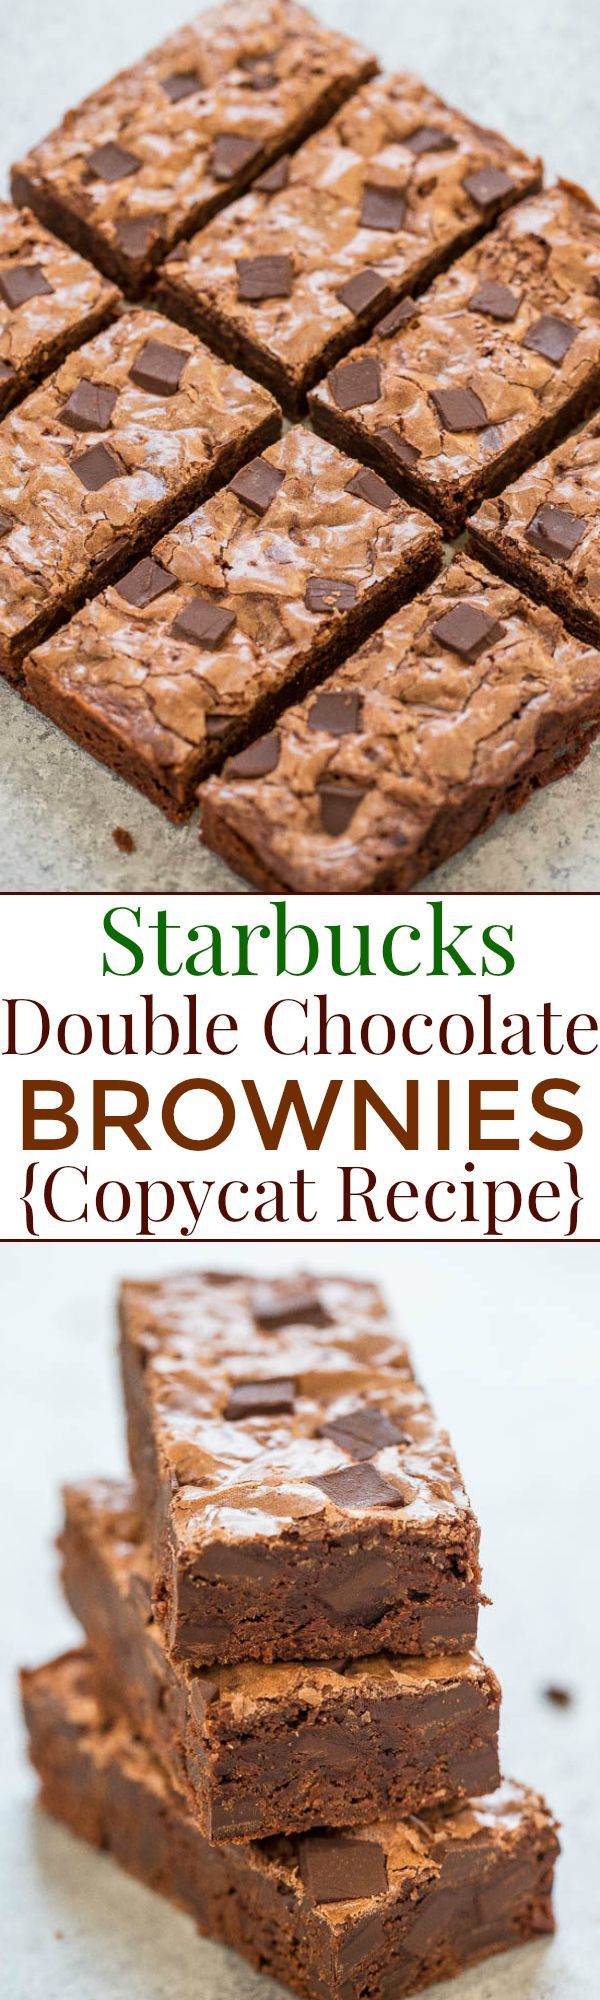 Starbucks Double Chocolate Brownies {Copycat Recipe} – Rich, fudgy, chewy, easy, no mixer recipe that tastes just like Starbucks!!